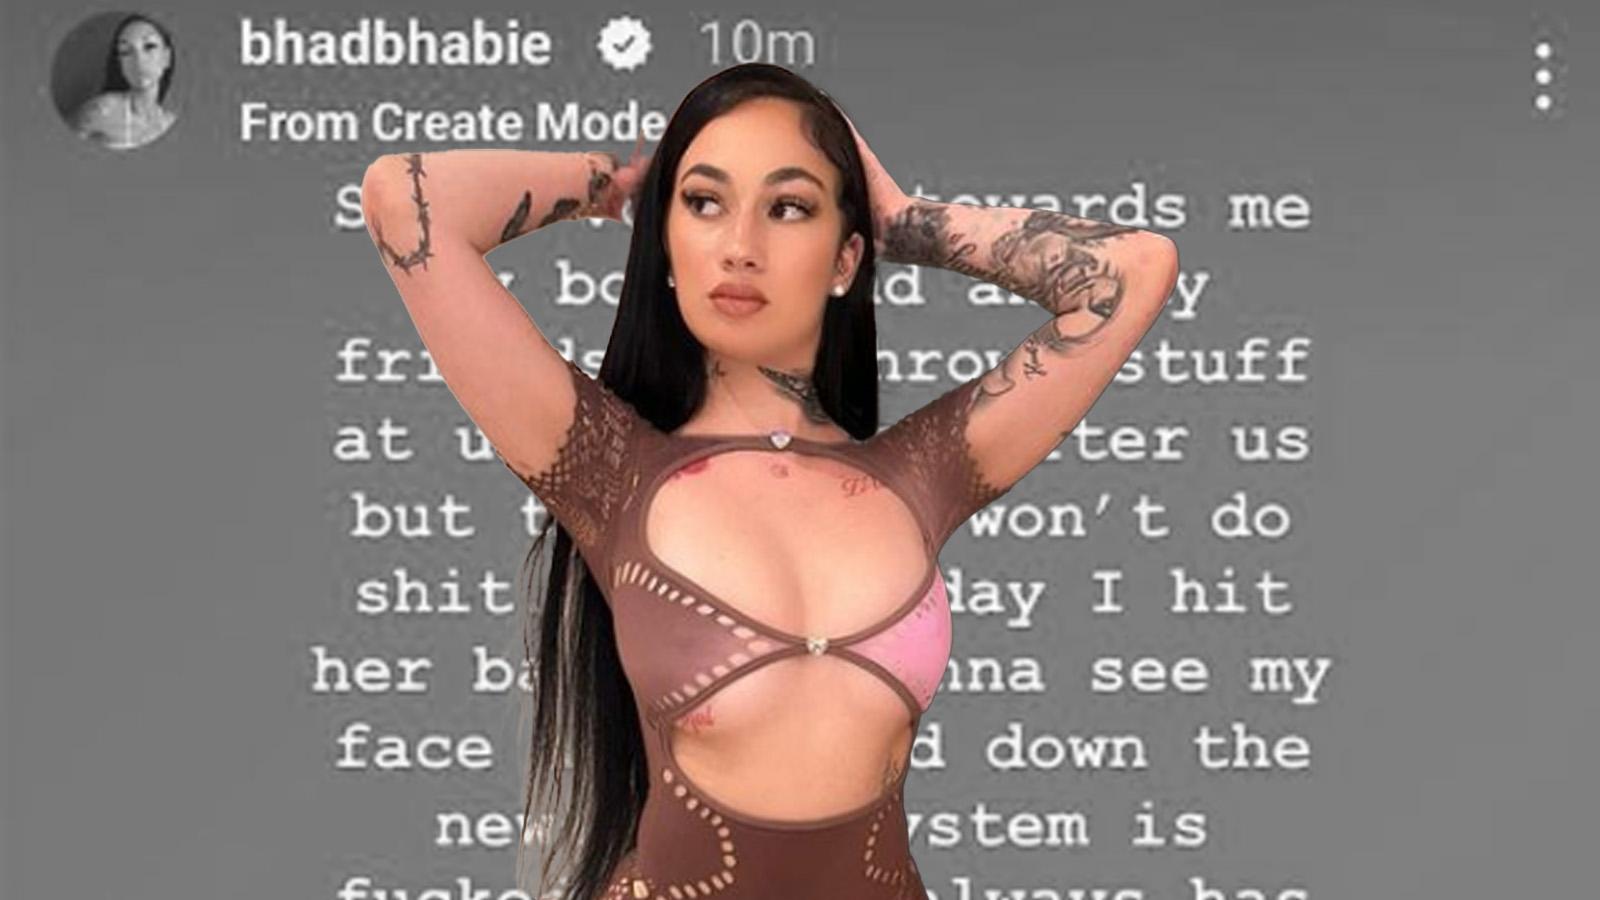 How to find bhad bhabie on onlyfans